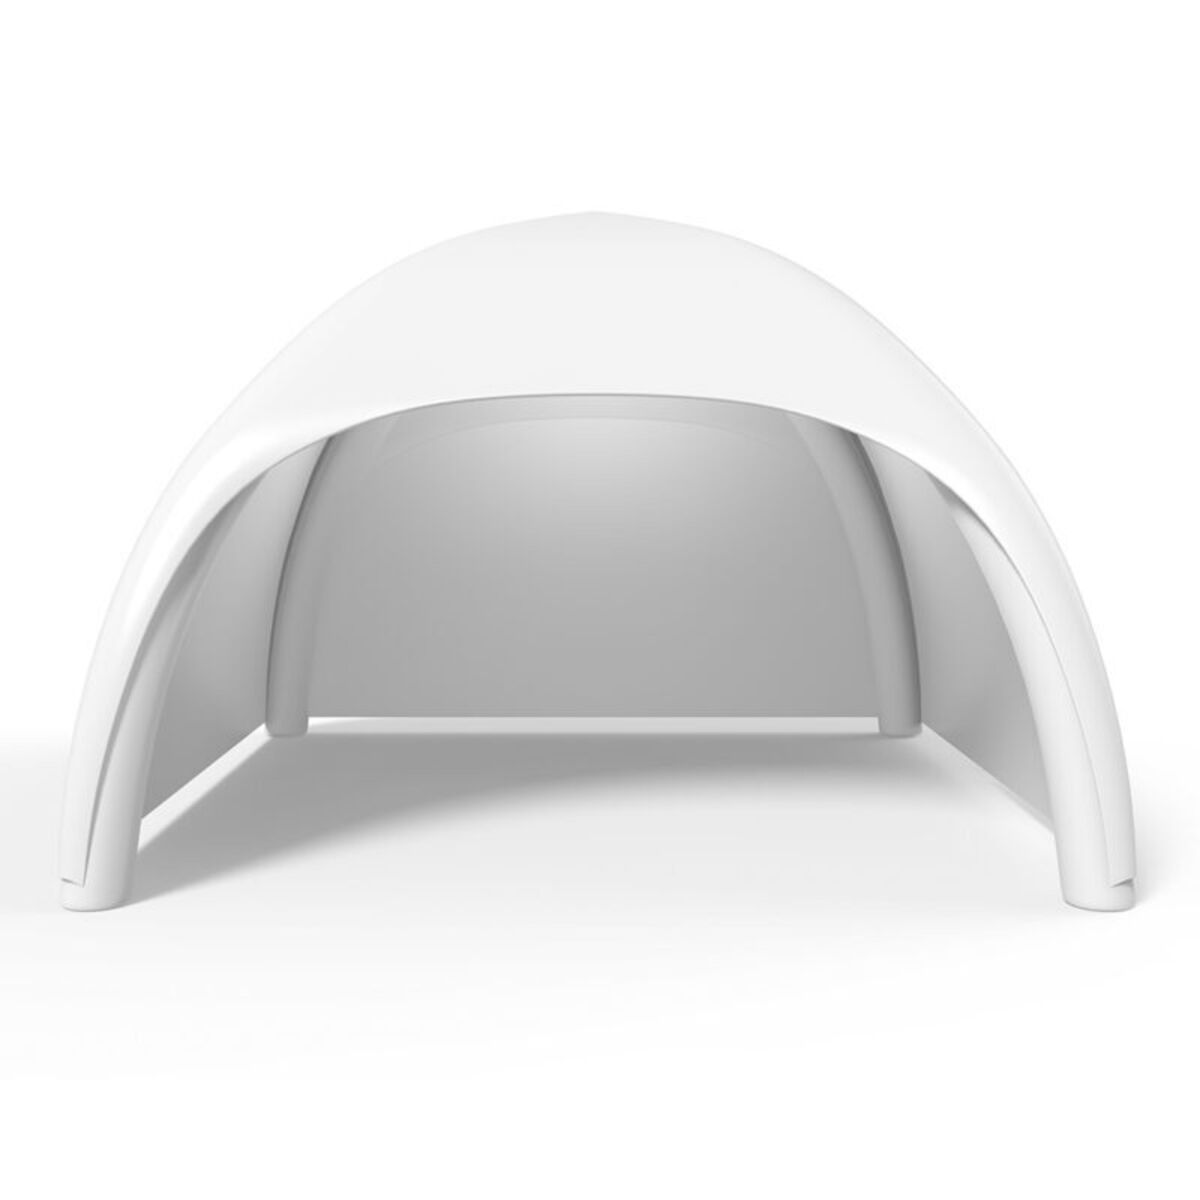 Inflatable-tent-roof-white-front-on-800x800.jpg